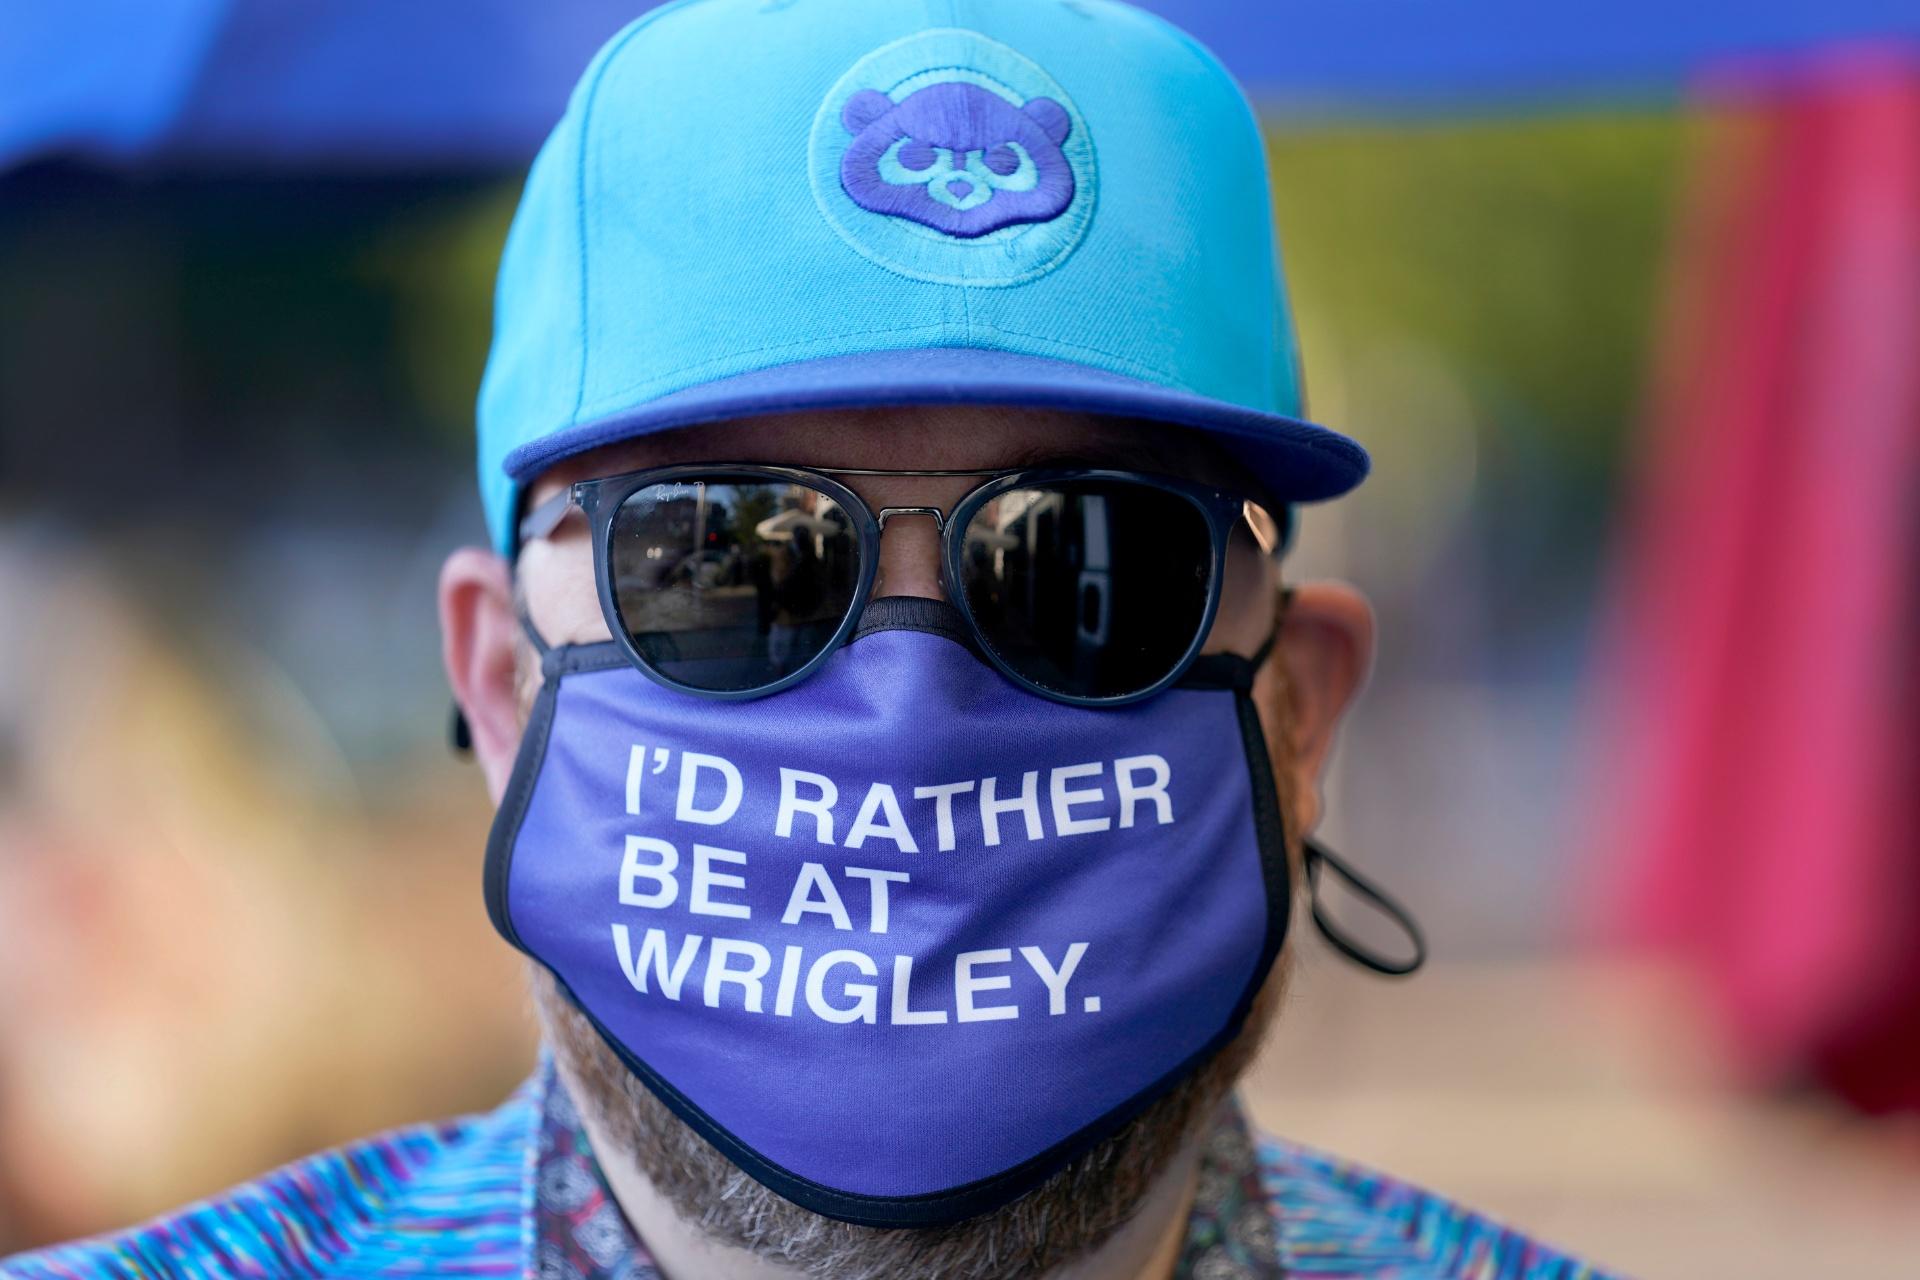 Patrick McCarron wears a Chicago Cubs cap and protective mask Friday, Sept. 4, 2020, as he heads to a rooftop venue to watch the Cubs host the rival St. Louis Cardinals at Wrigley Field in Chicago. (AP Photo / Charles Rex Arbogast)